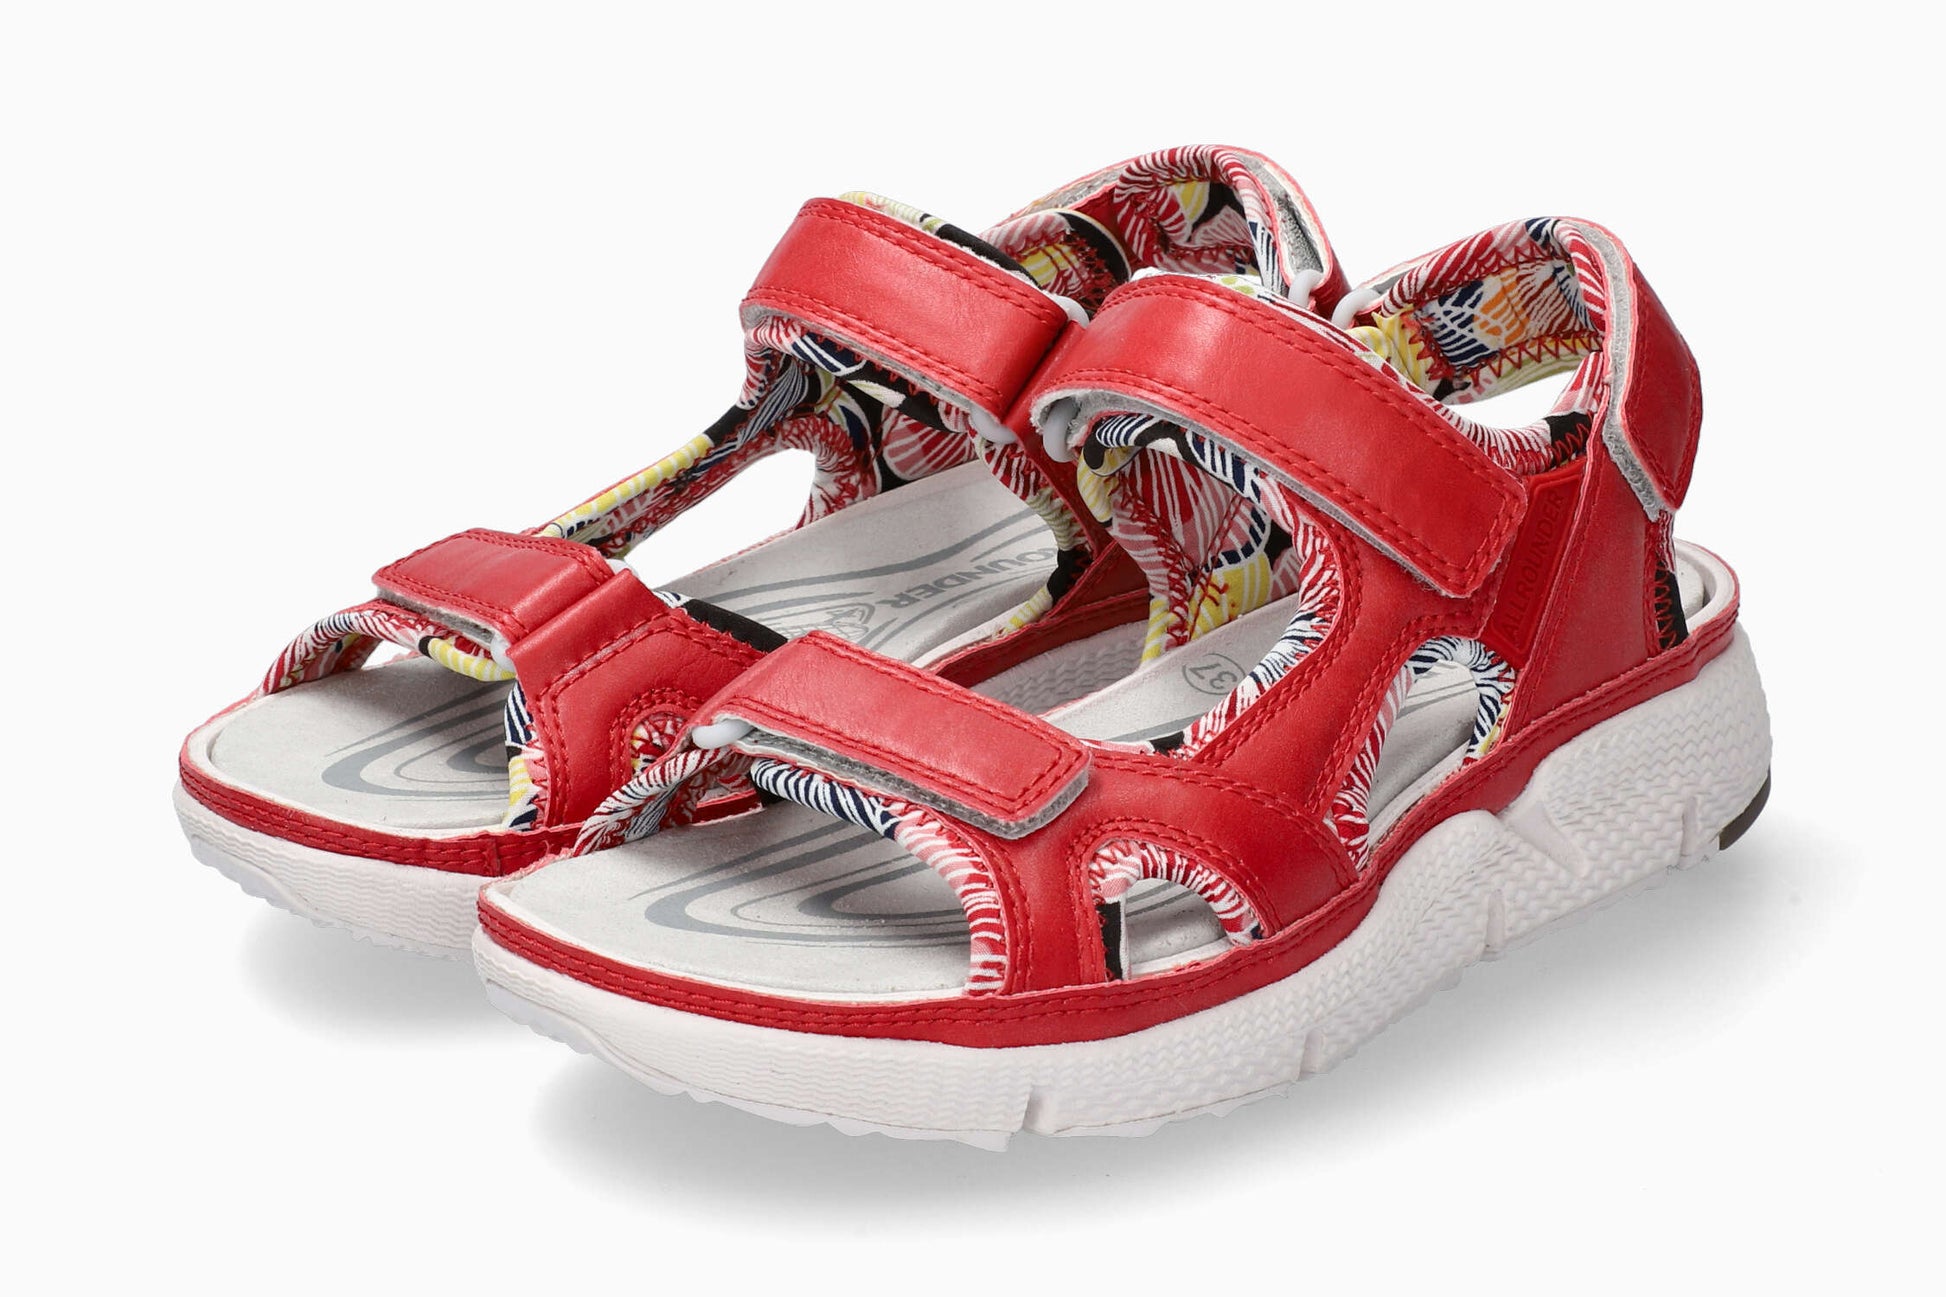 Allrounder Its Me Red Women's Sandal